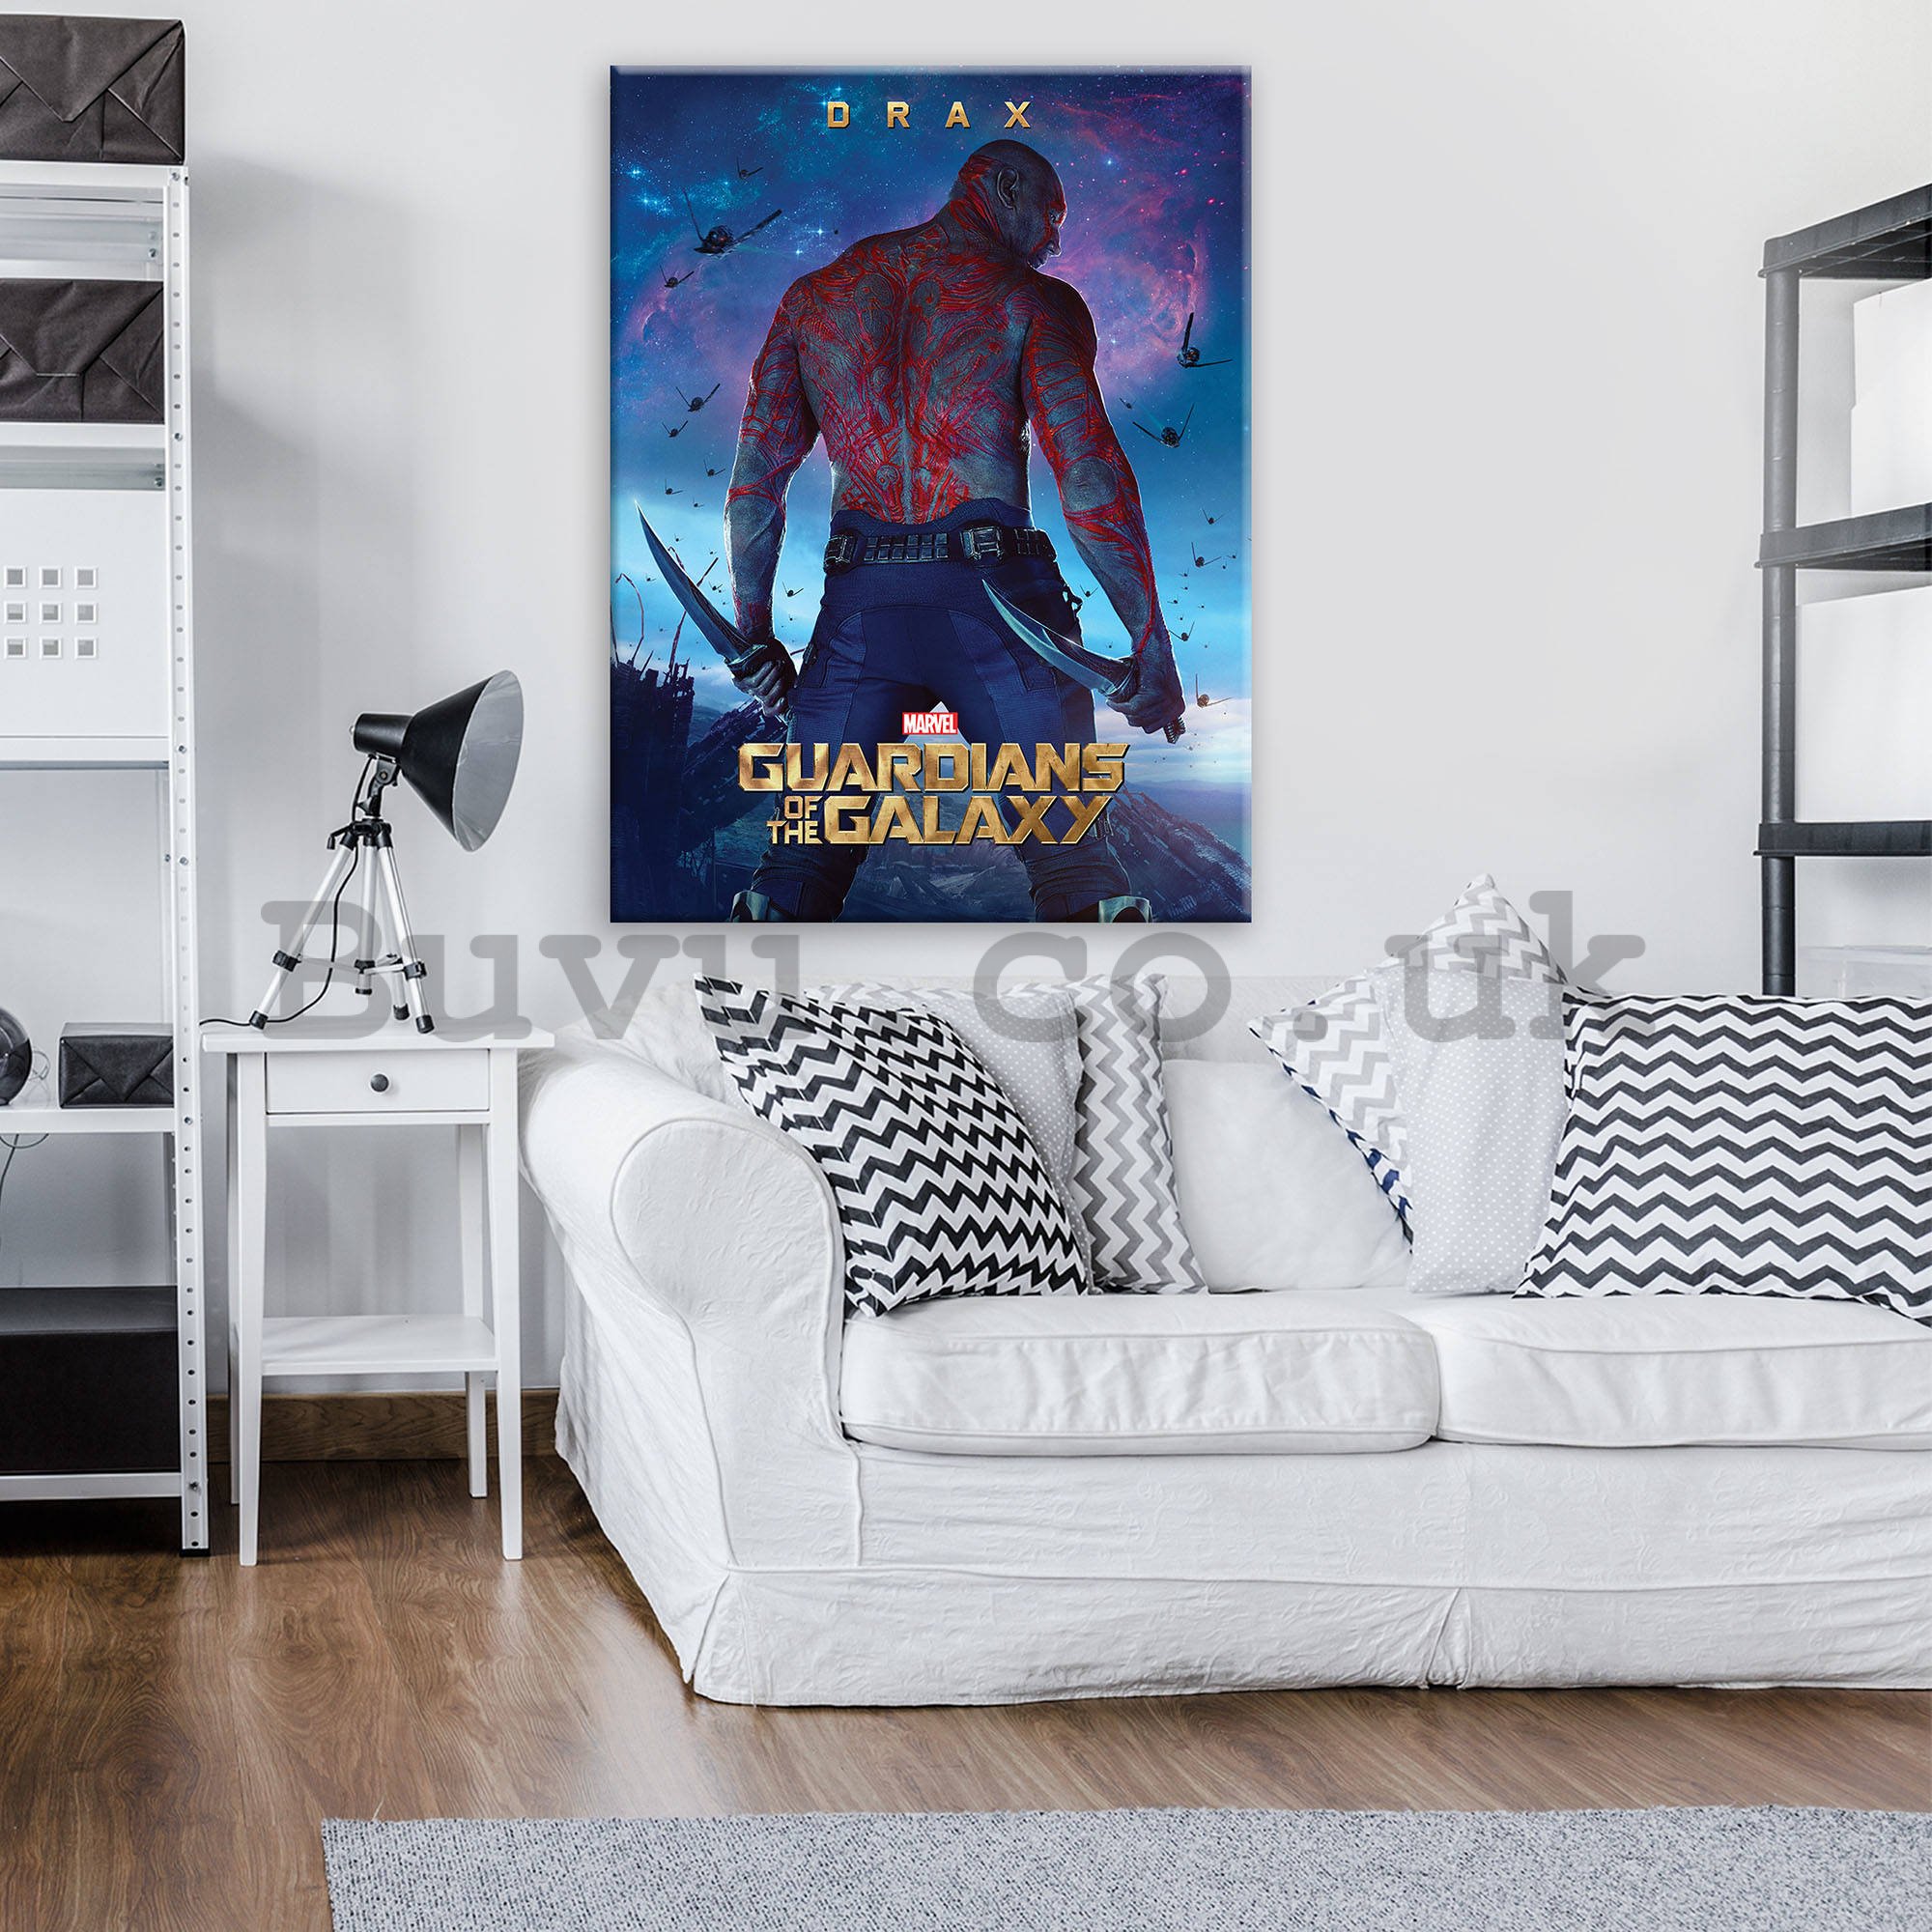 Painting on canvas: Guardians of The Galaxy Drax - 40x60 cm